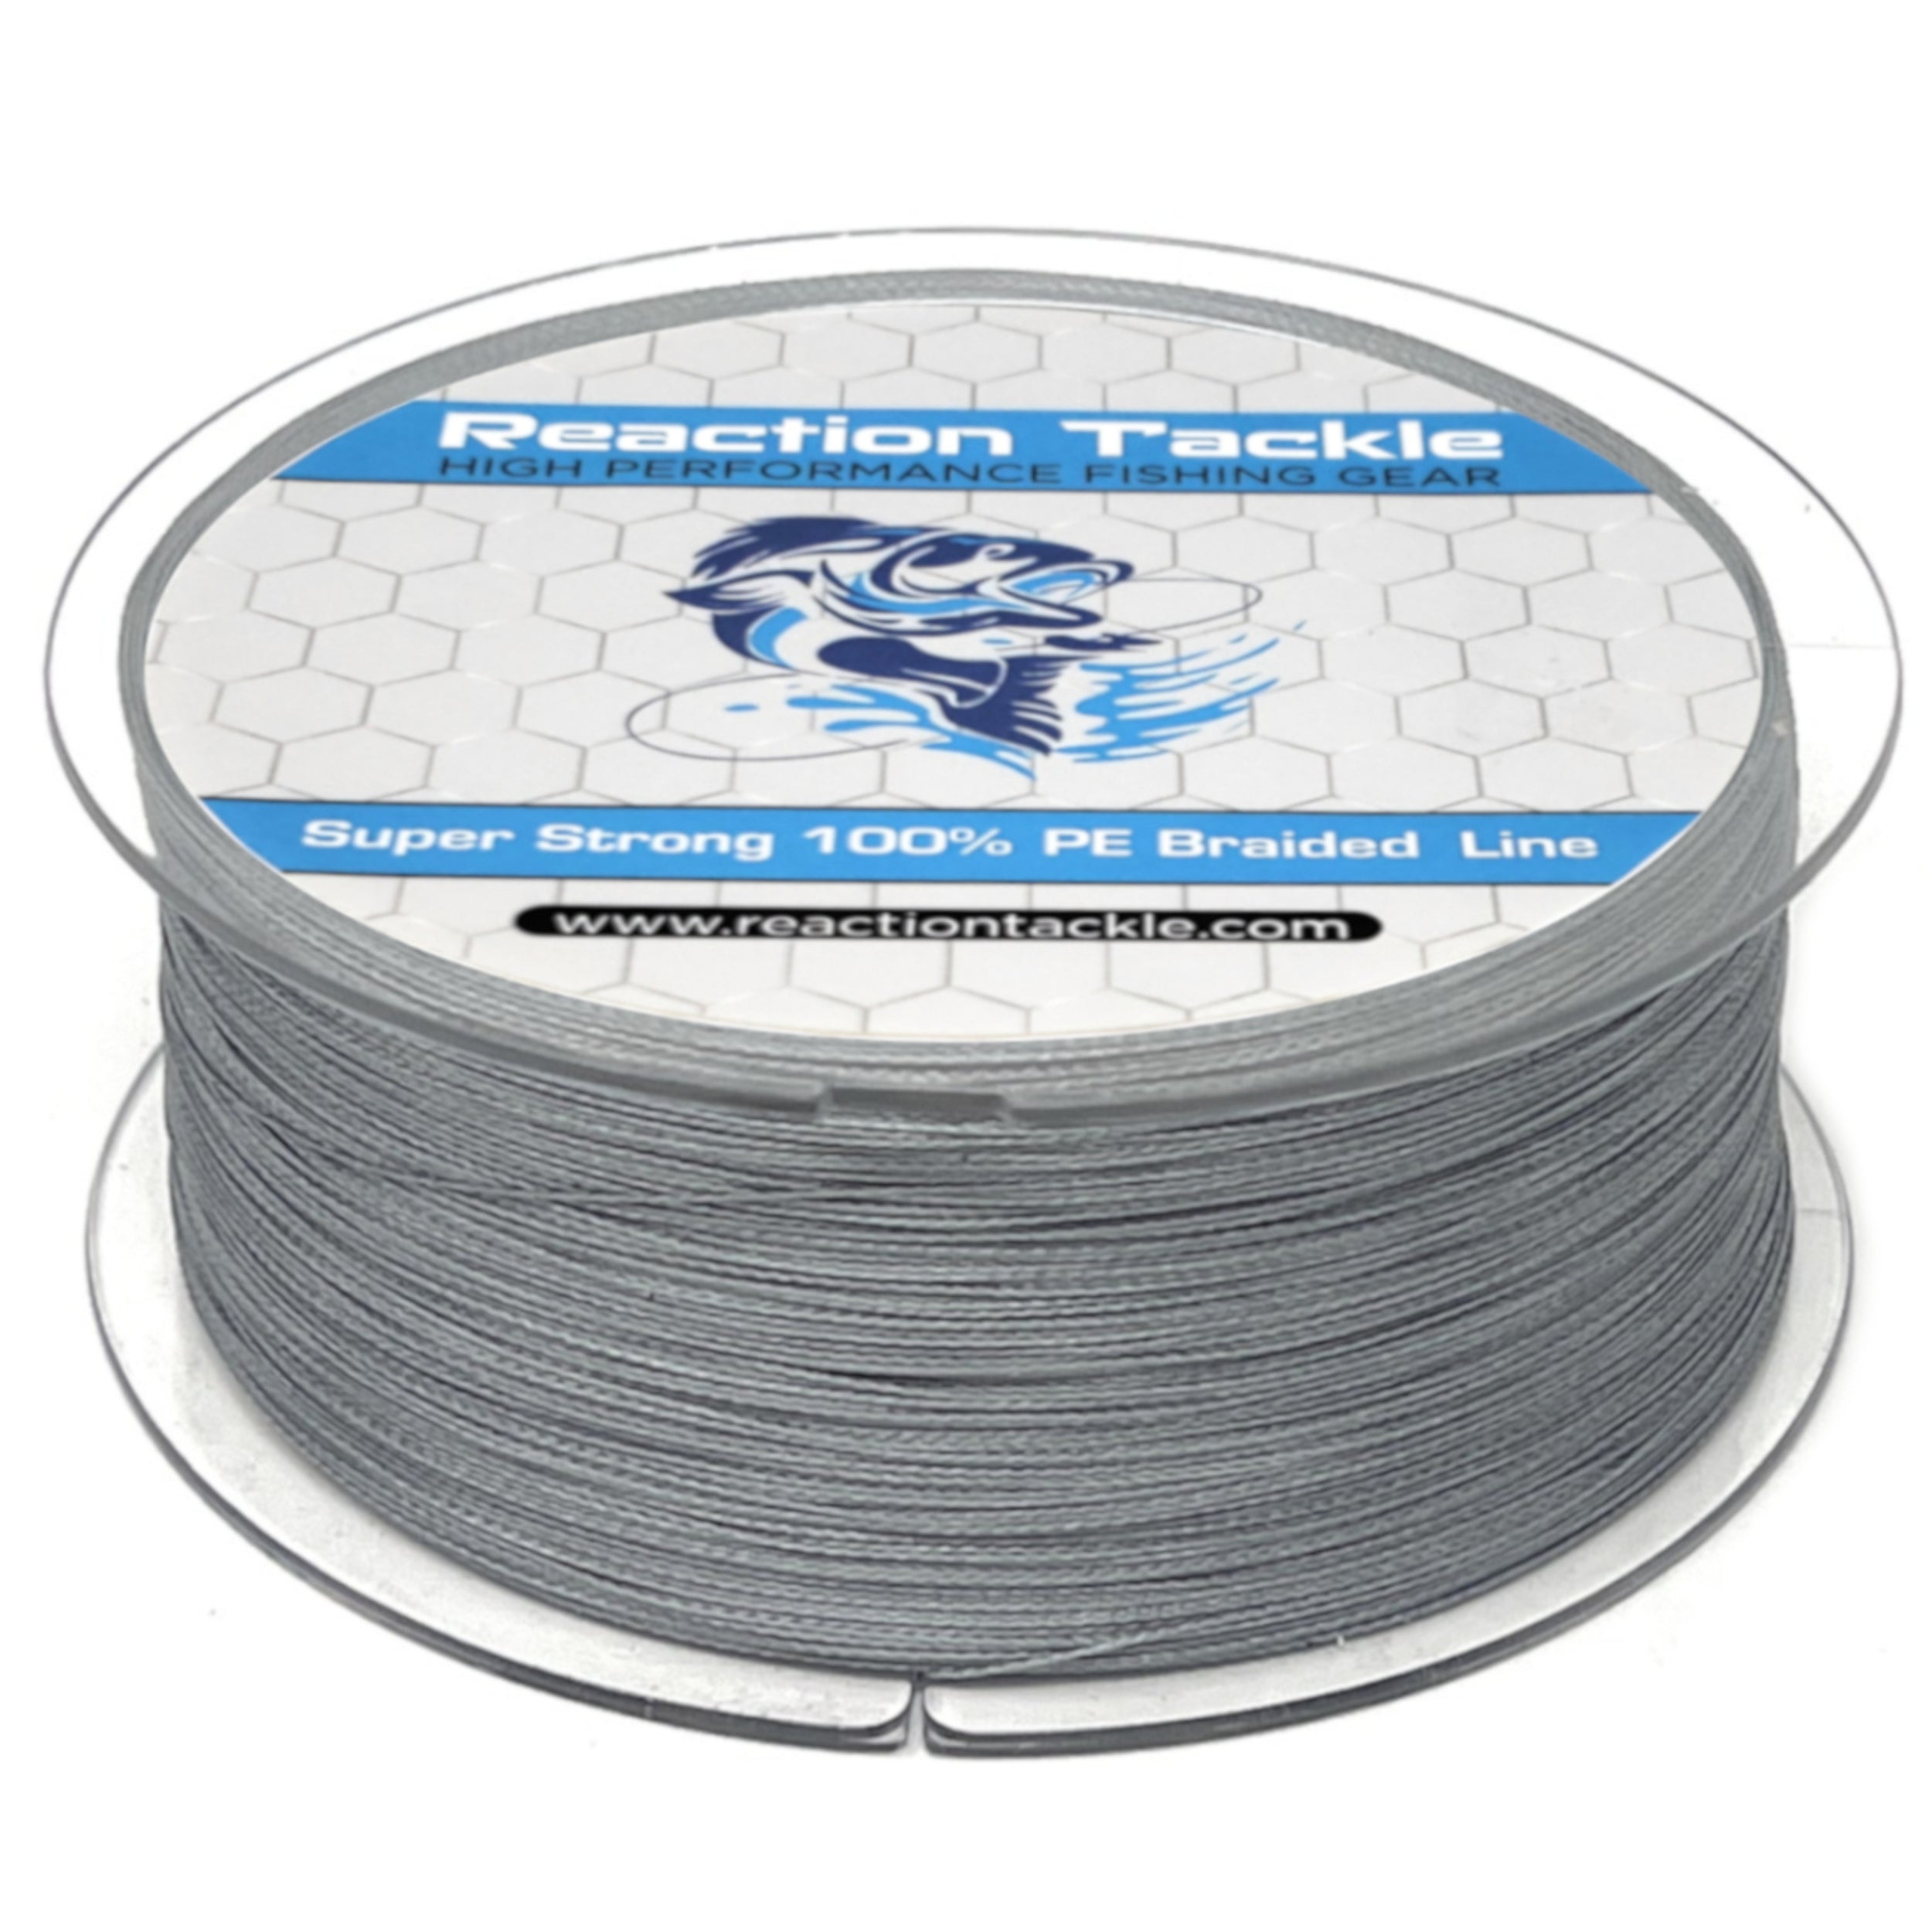 Chief Angler Saltwater and Freshwater PE Braided Fishing Line